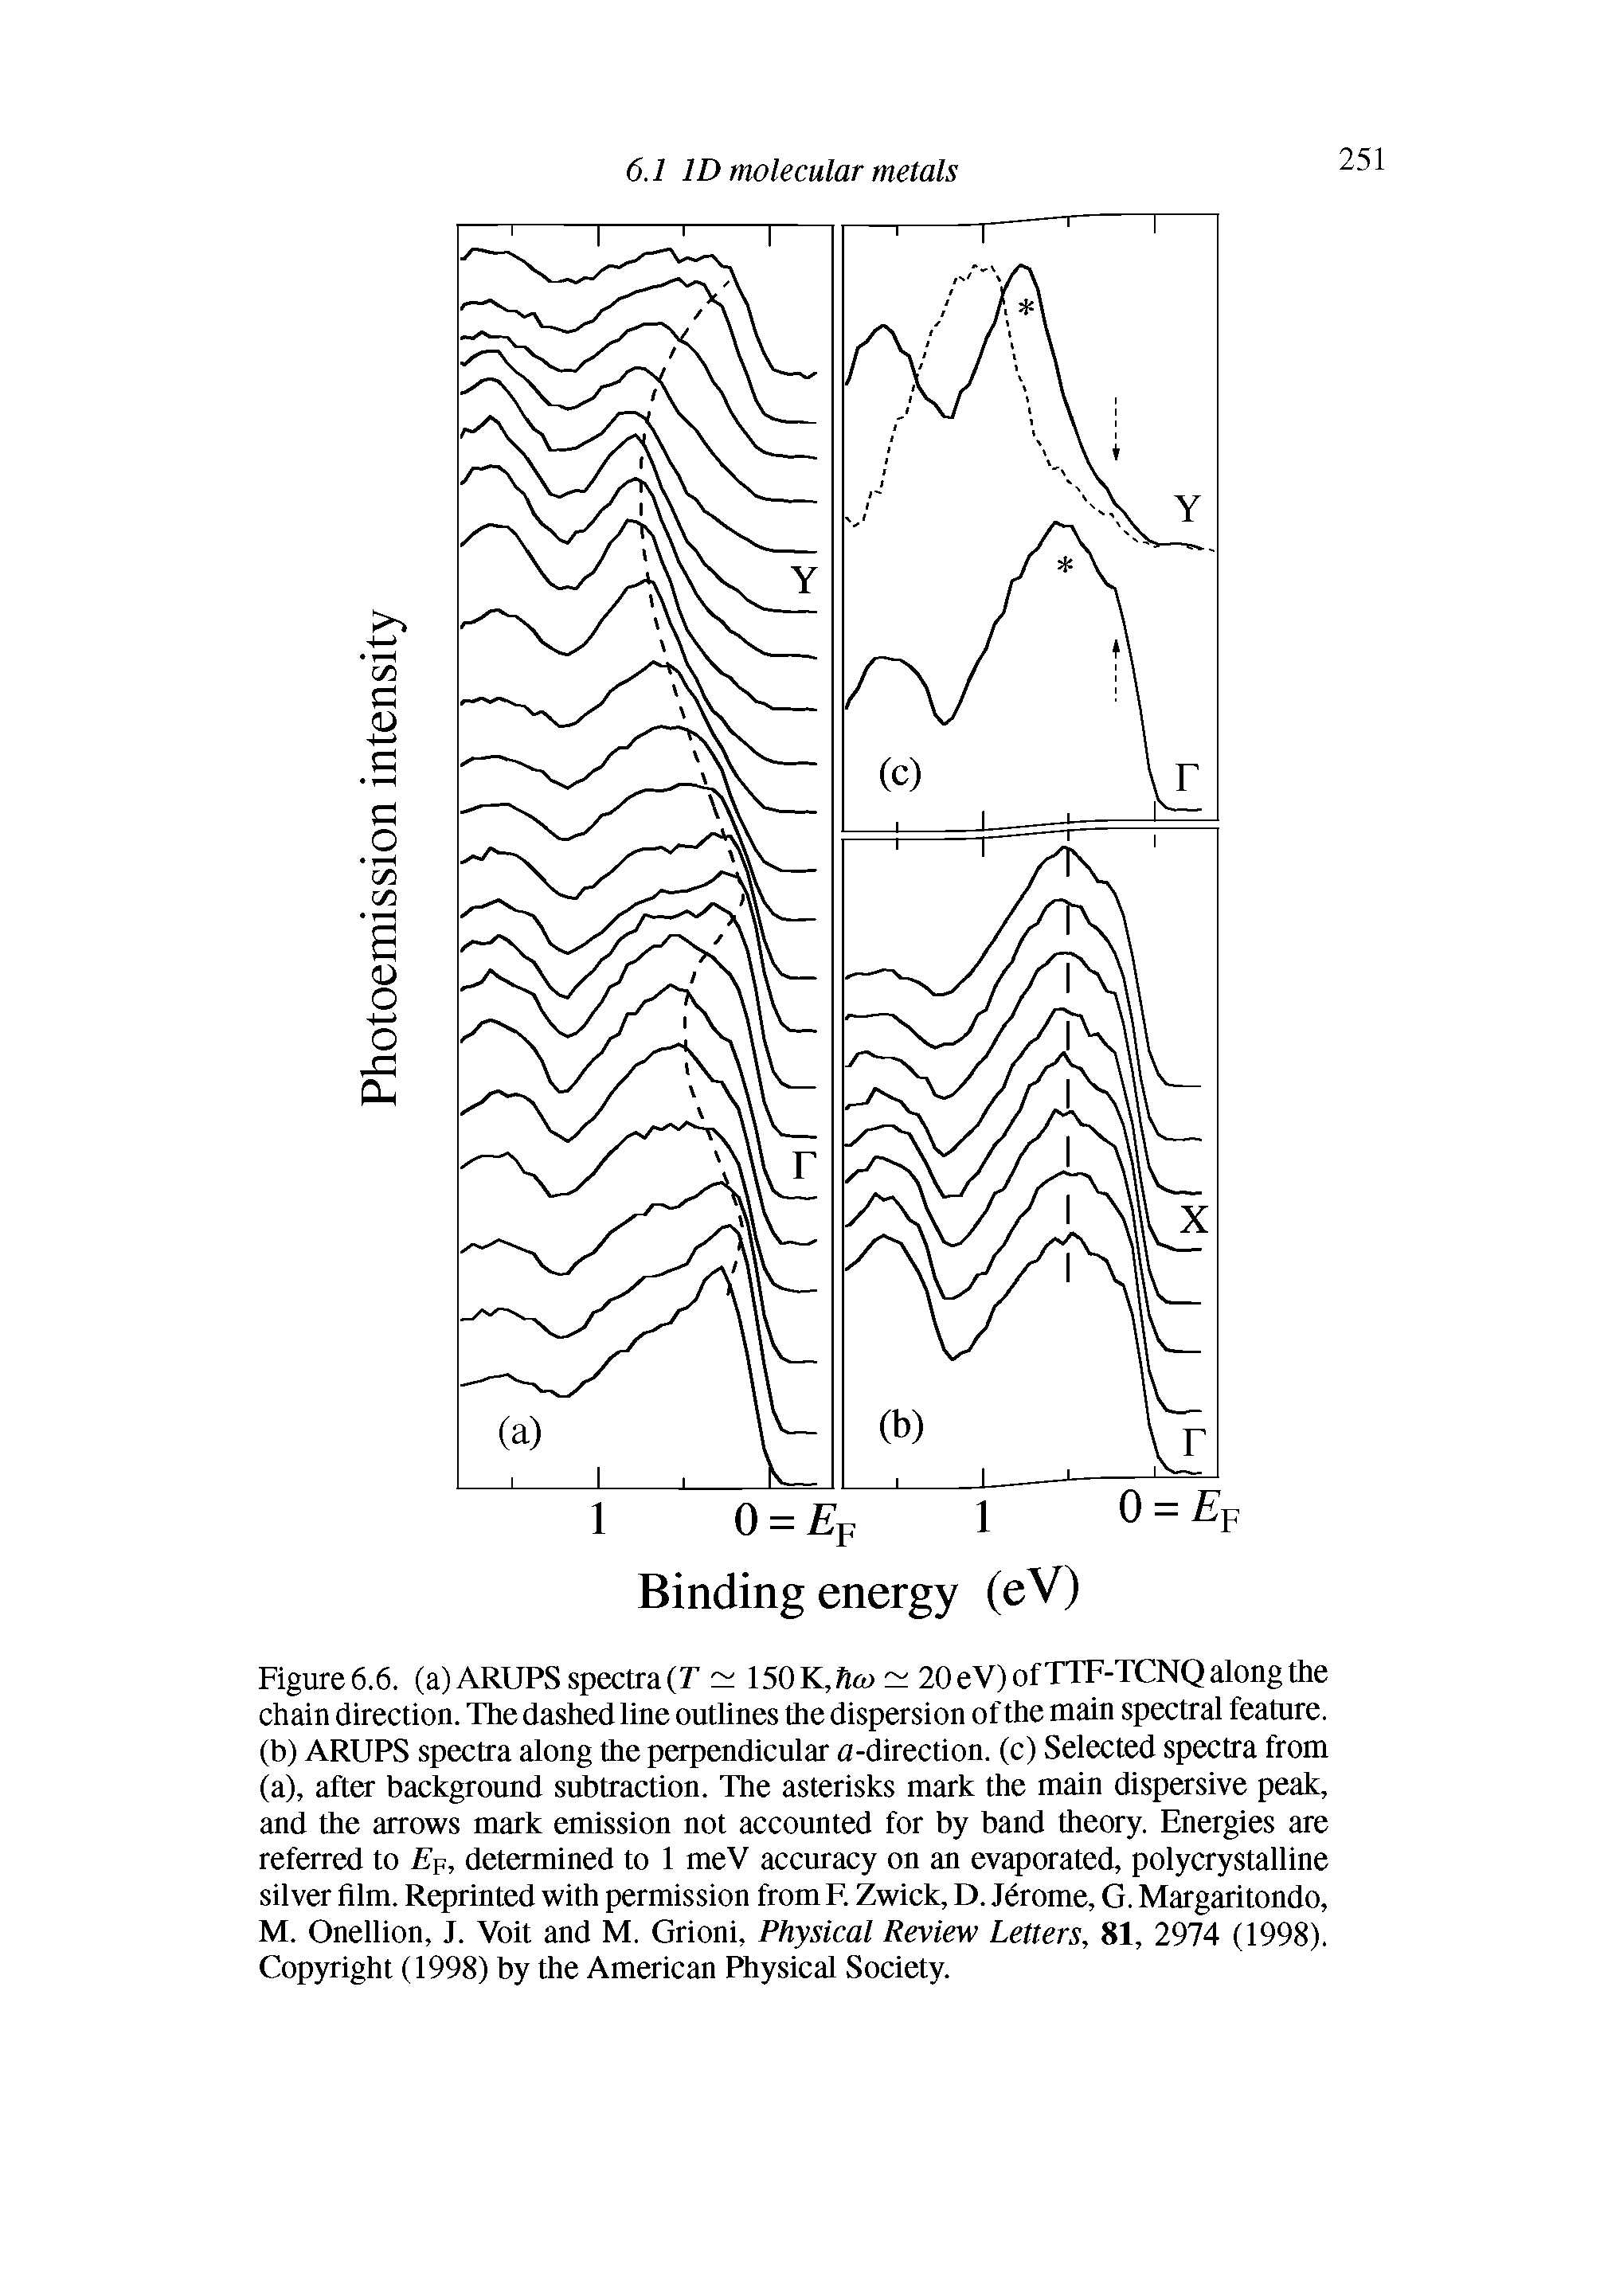 Figure6.6. (a) ARUPS spectra(F 150K,n 20eV)ofTTF-TCNQalongthe chain direction. The dashed line outlines the dispersion of the main spectral feature, (b) ARUPS spectra along the perpendicular a-direction. (c) Selected spectra from (a), after background subtraction. The asterisks mark the main dispersive peak, and the arrows mark emission not accounted for by band theory. Energies are referred to E-p, determined to 1 meV accuracy on an evaporated, polycrystalline silver film. Reprinted with permission from F. Zwick, D. Jdrome, G. Margaritondo, M. Onellion, J. Voit and M. Grioni, Physical Review Letters, 81, 2974 (1998). Copyright (1998) by the American Physical Society.